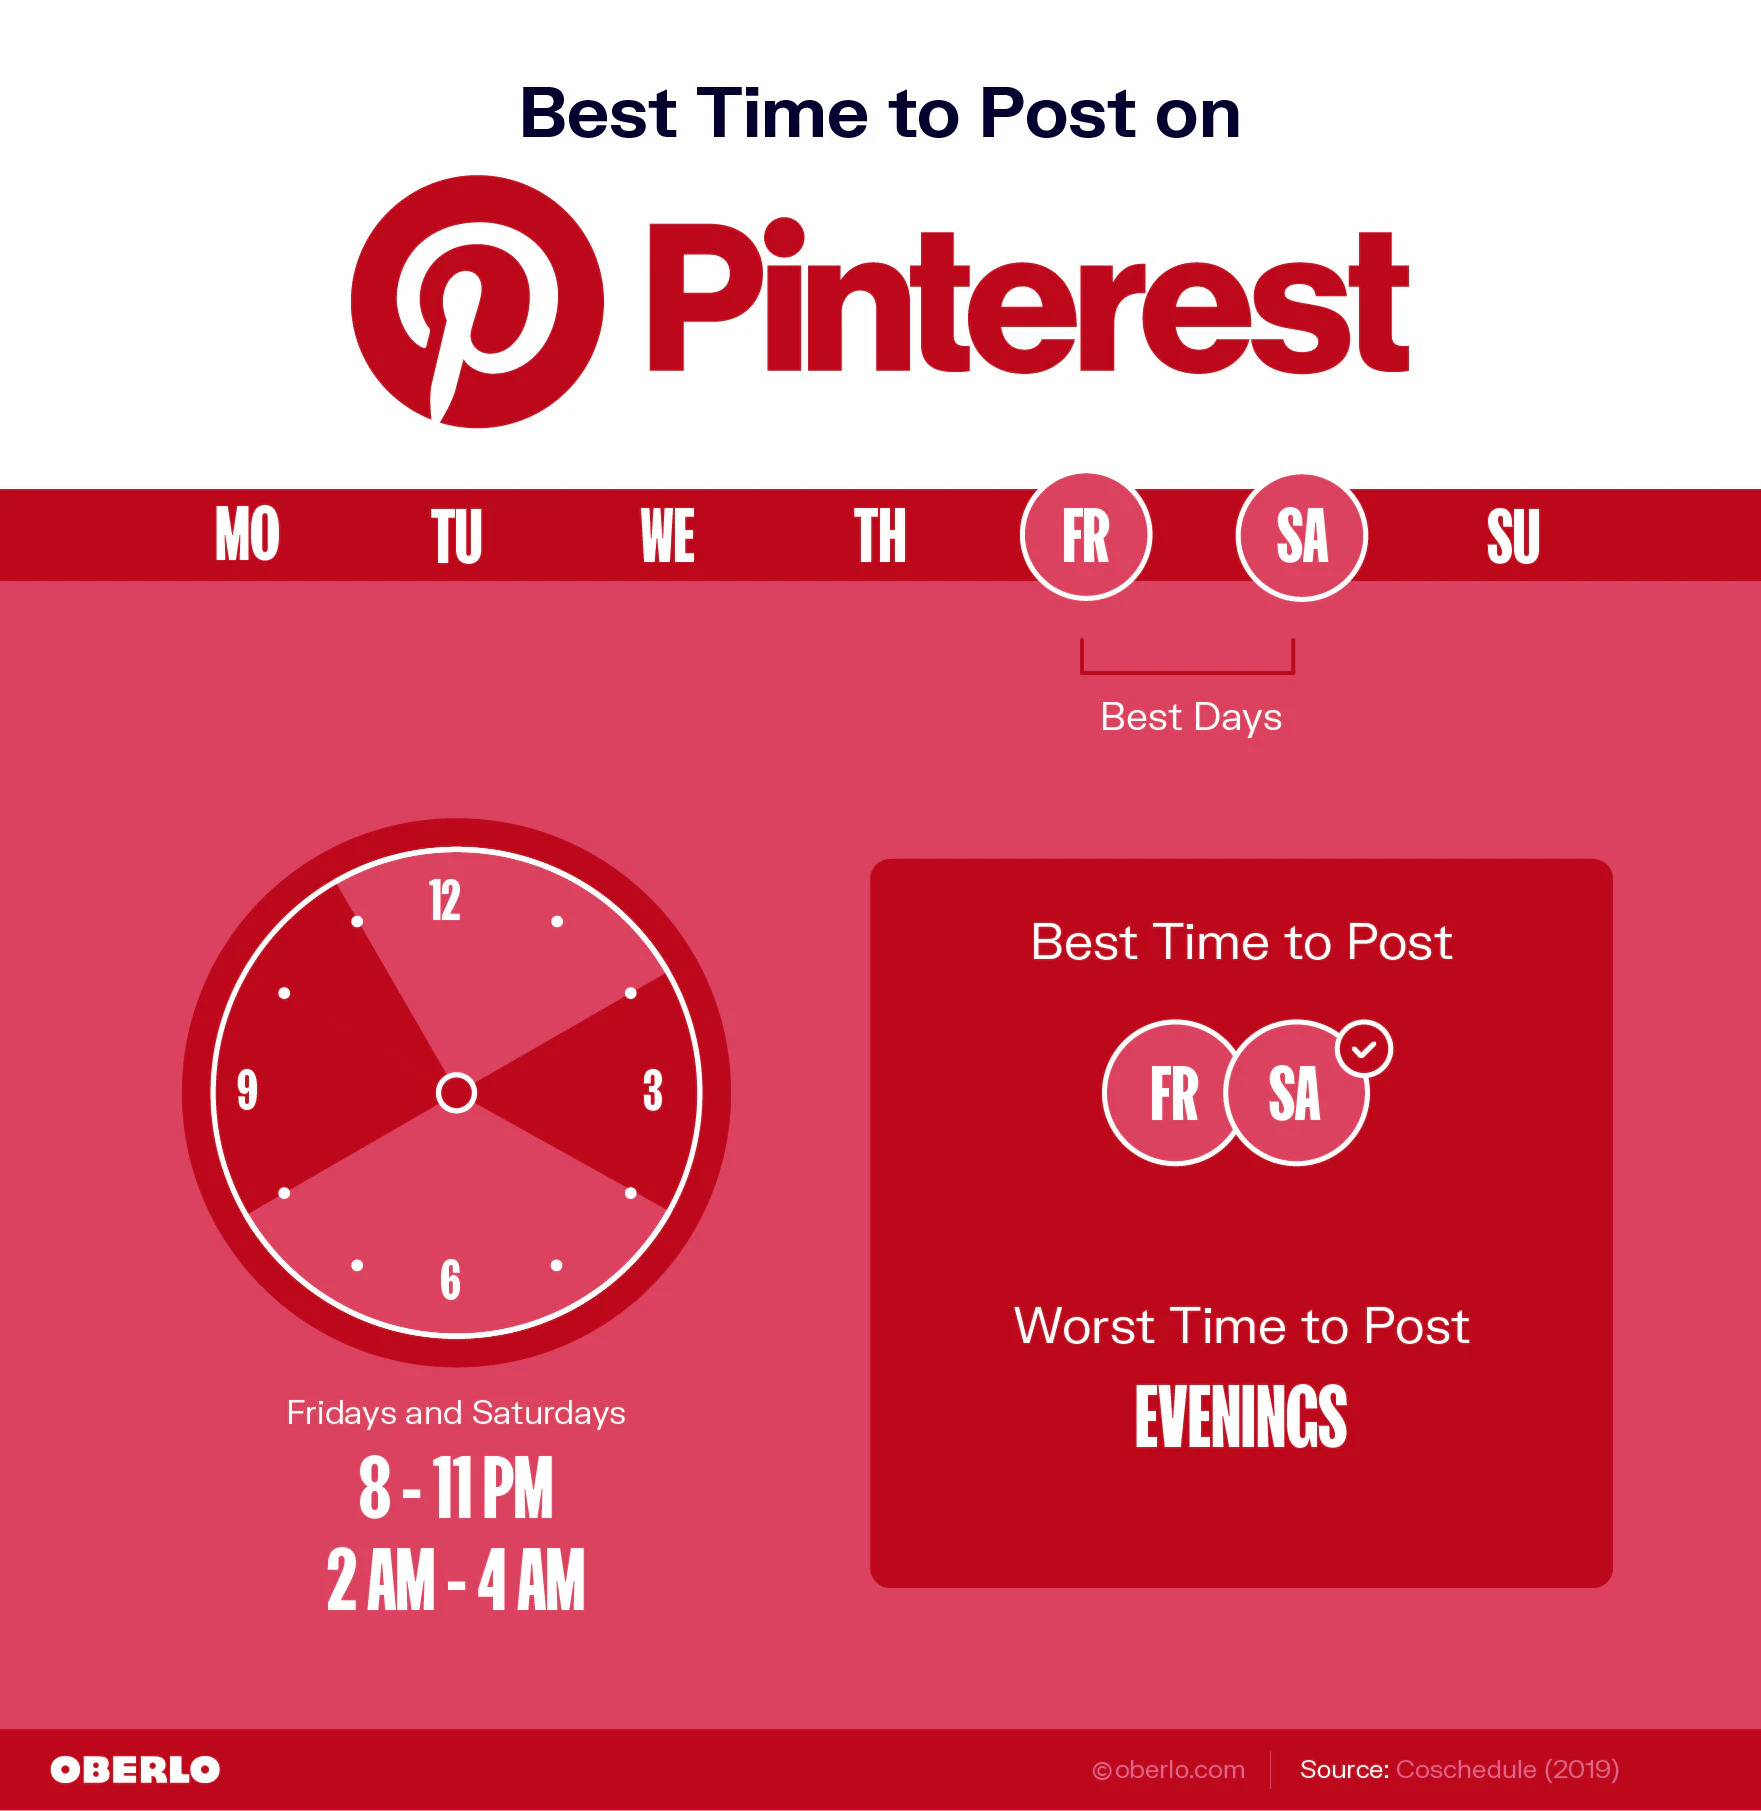 1611654959 best time to post on pinterest